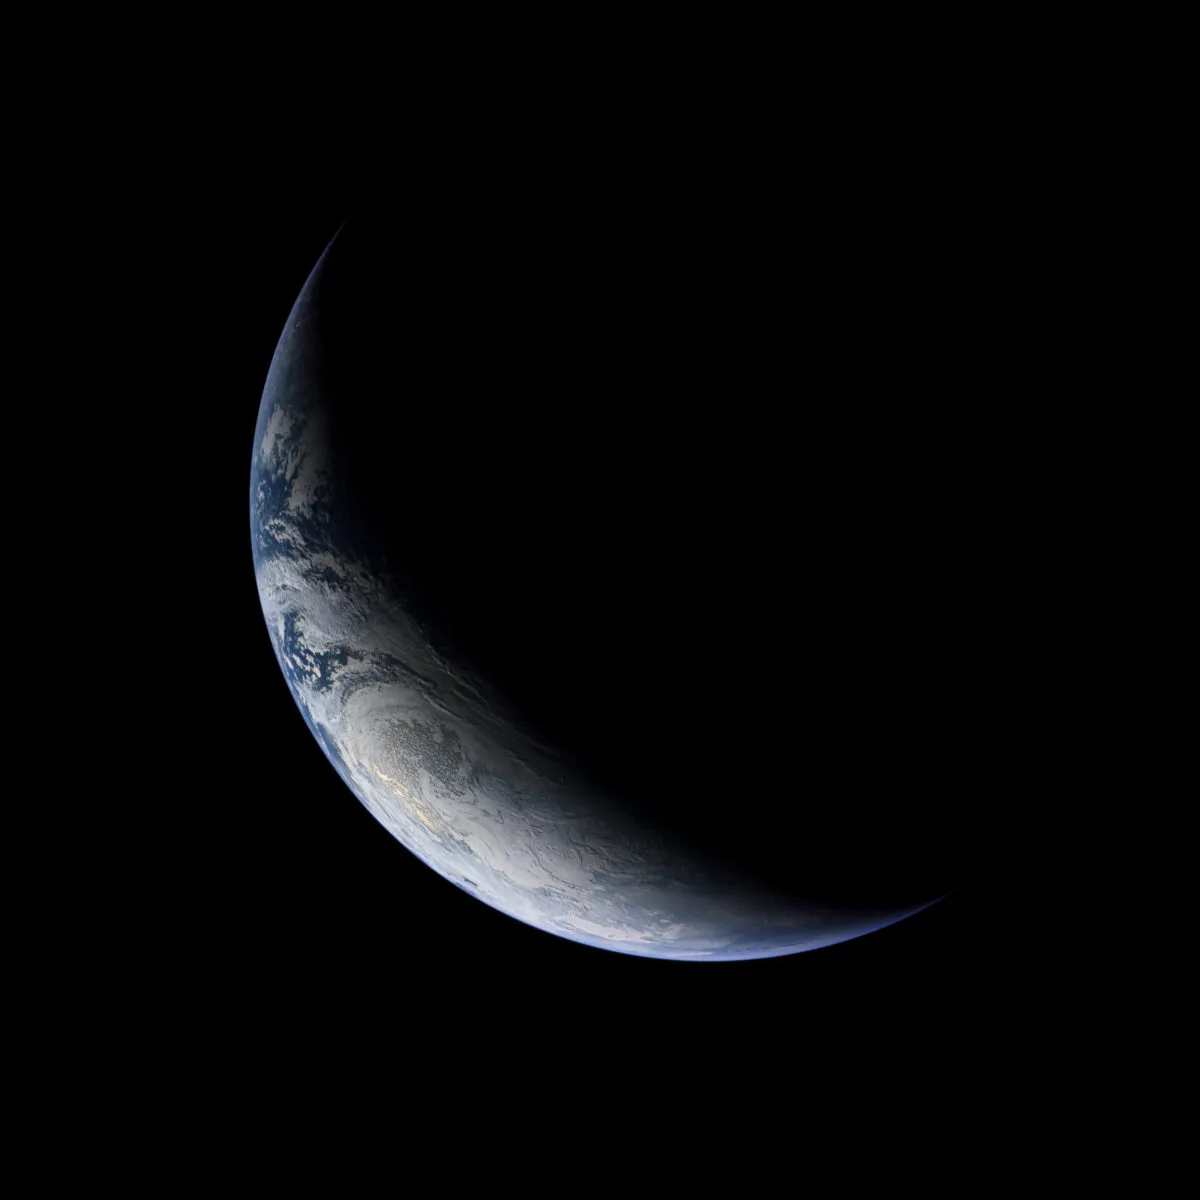 A view of the crescent Earth captured by an automatic camera during the Apollo 4 mission, 9 November 1967. Credit: NASA / restored by Toby Ord